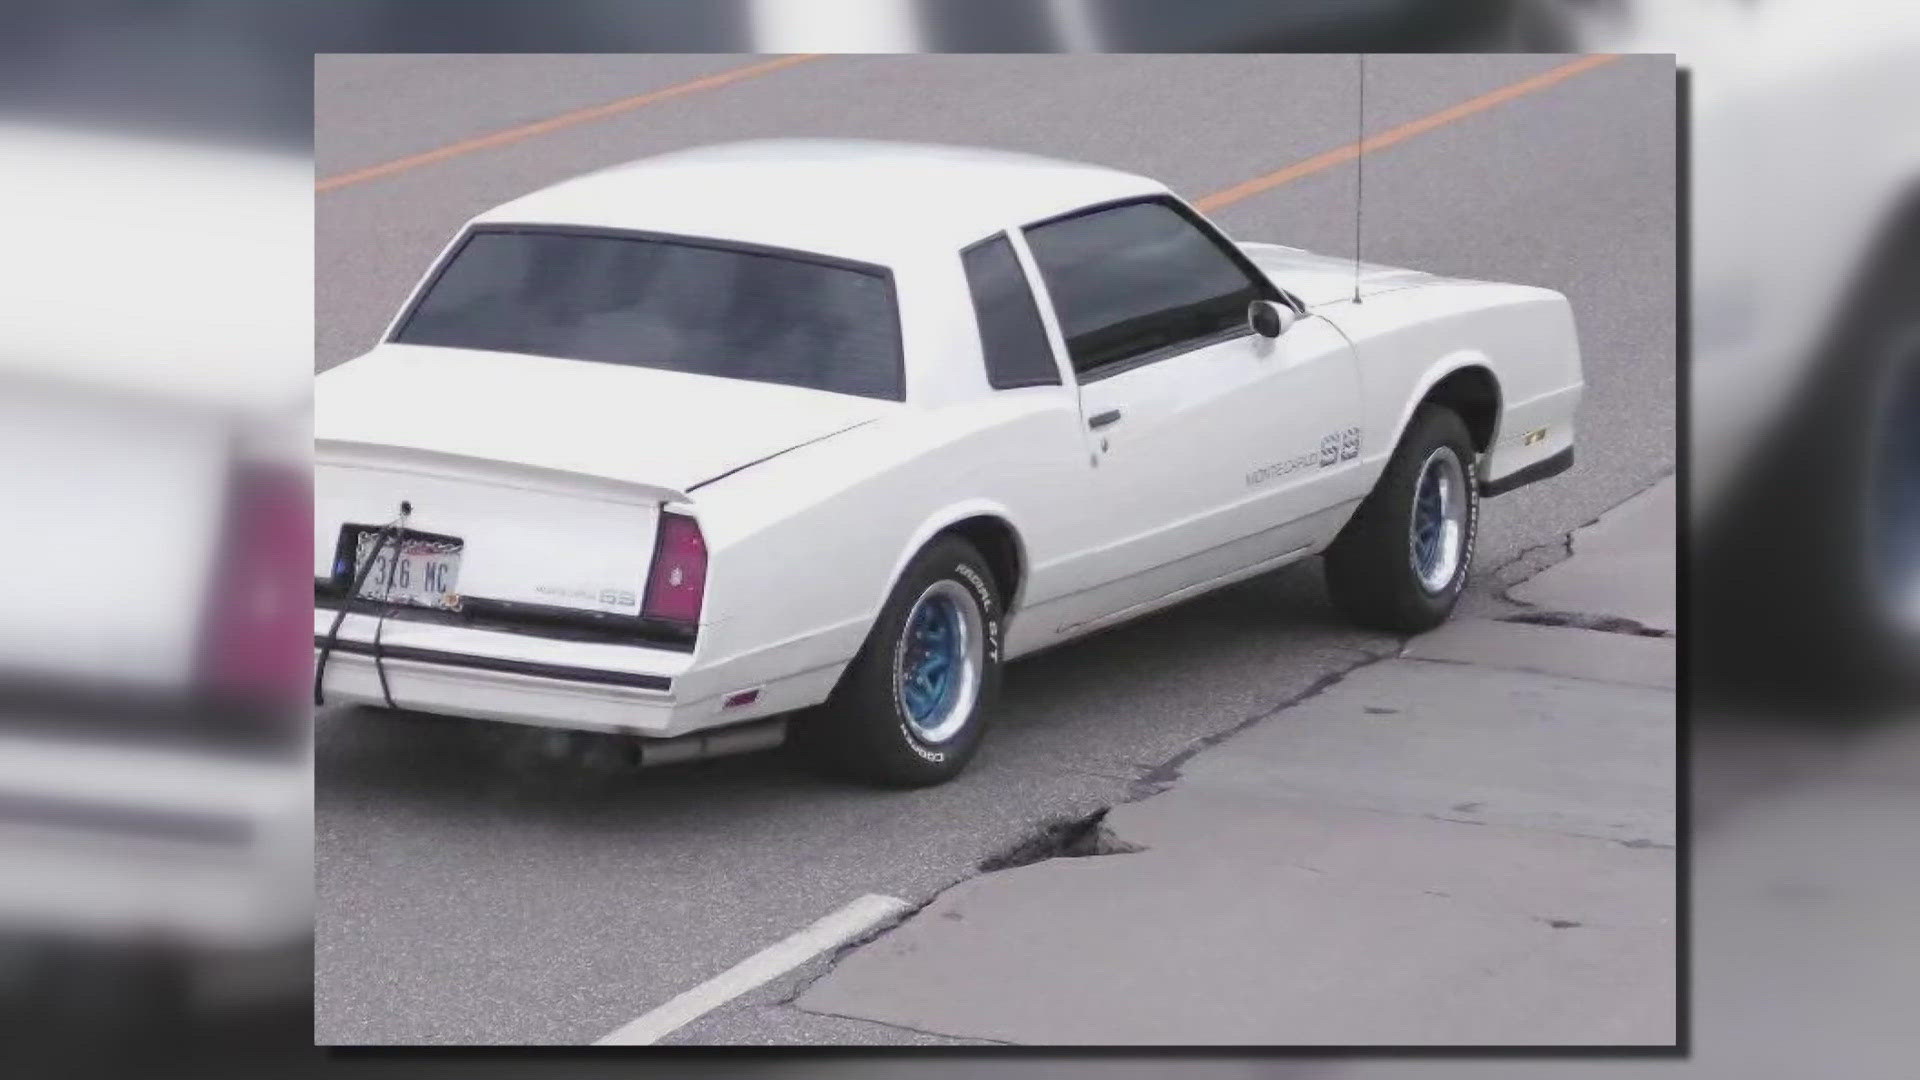 Cleveland police say a 1983 Chevrolet Monte Carlo struck the victim and dragged him several feet in the 18100 block of Euclid Avenue.